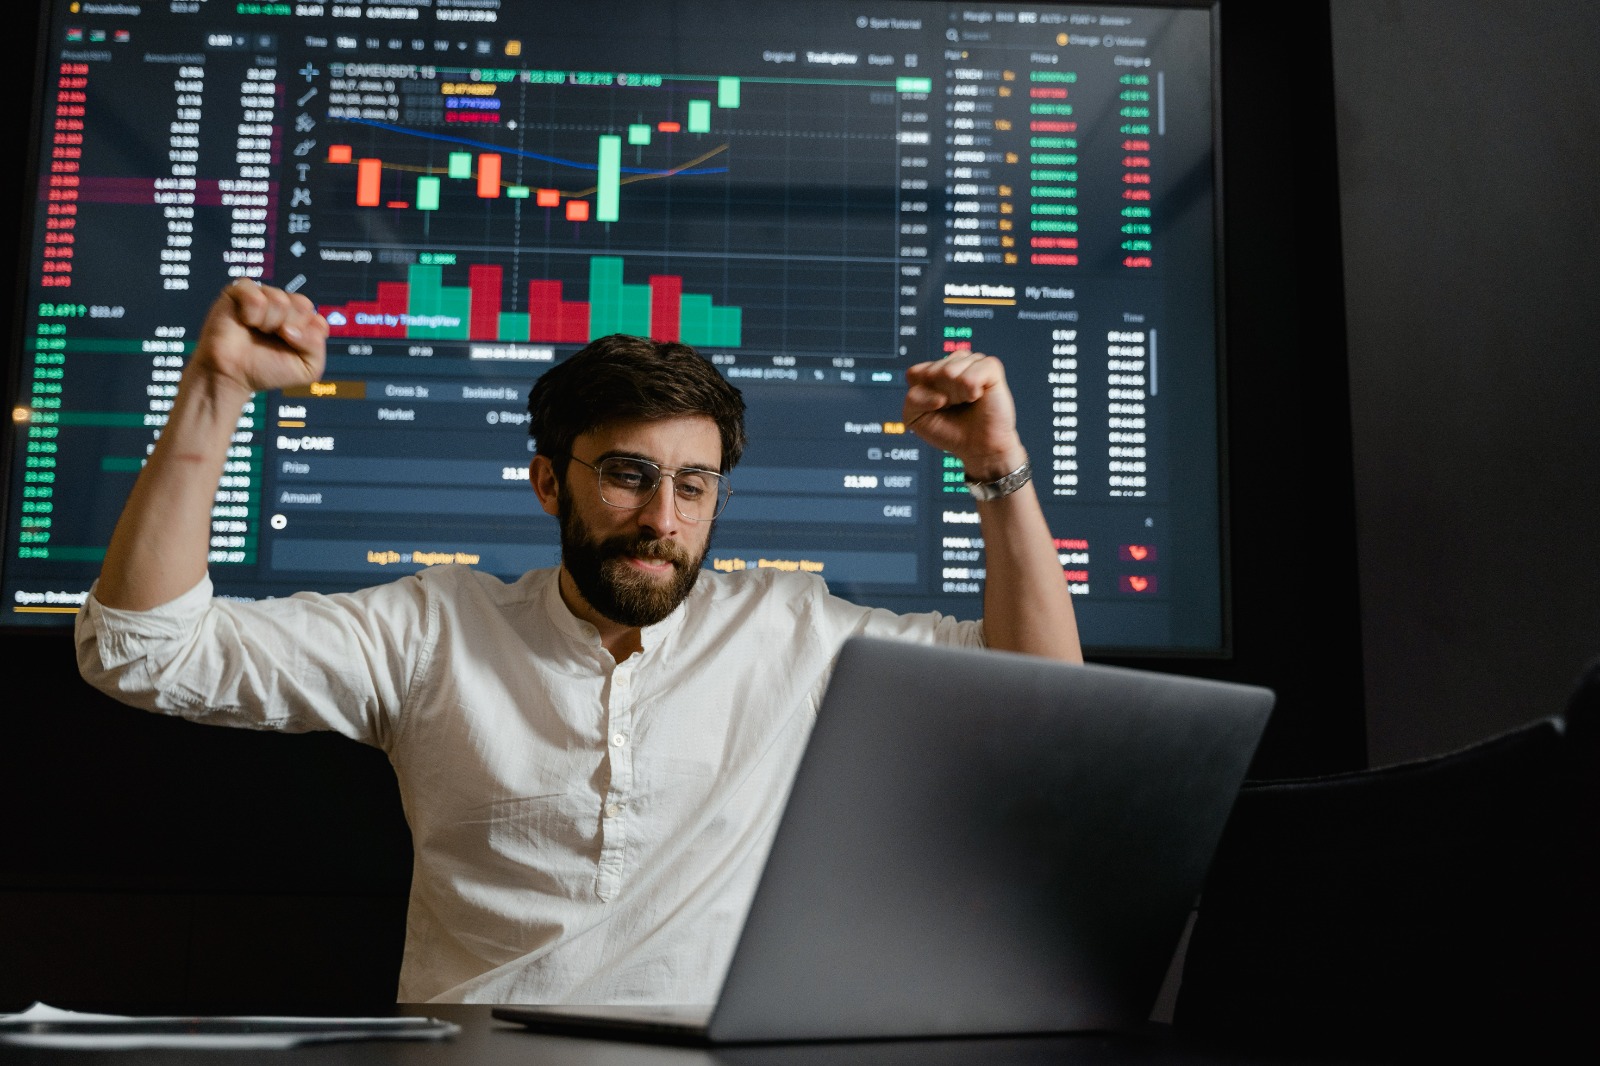 man excited about his success in stock market